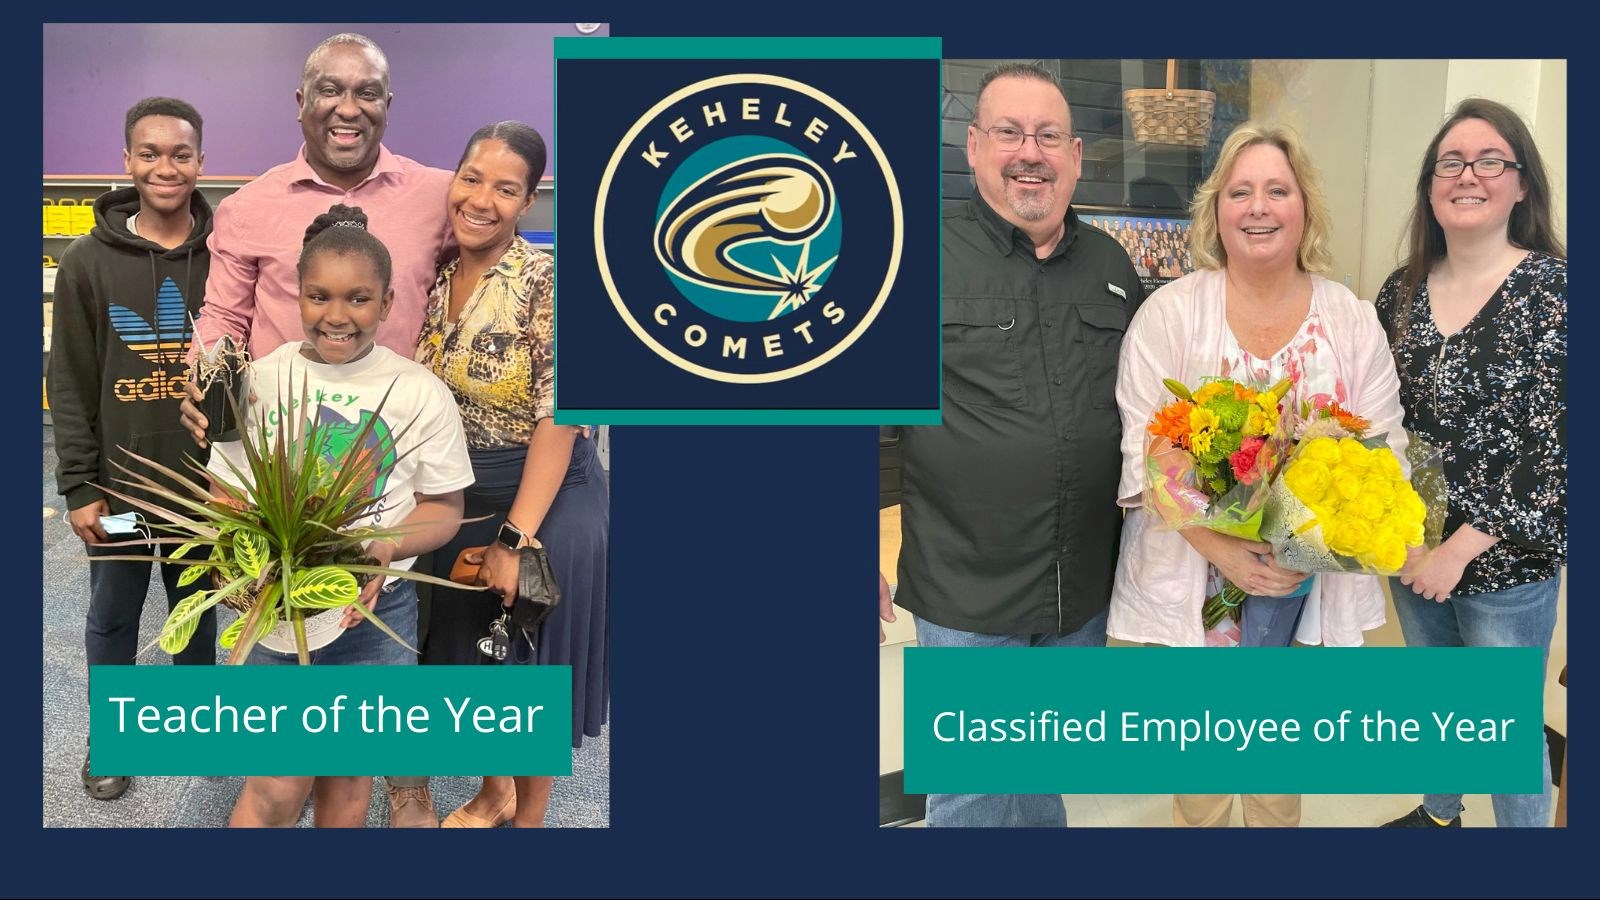 Teacher of the Year family and Classified employee of the year family both smiling at the camera with Keheley Comets logo between pictures